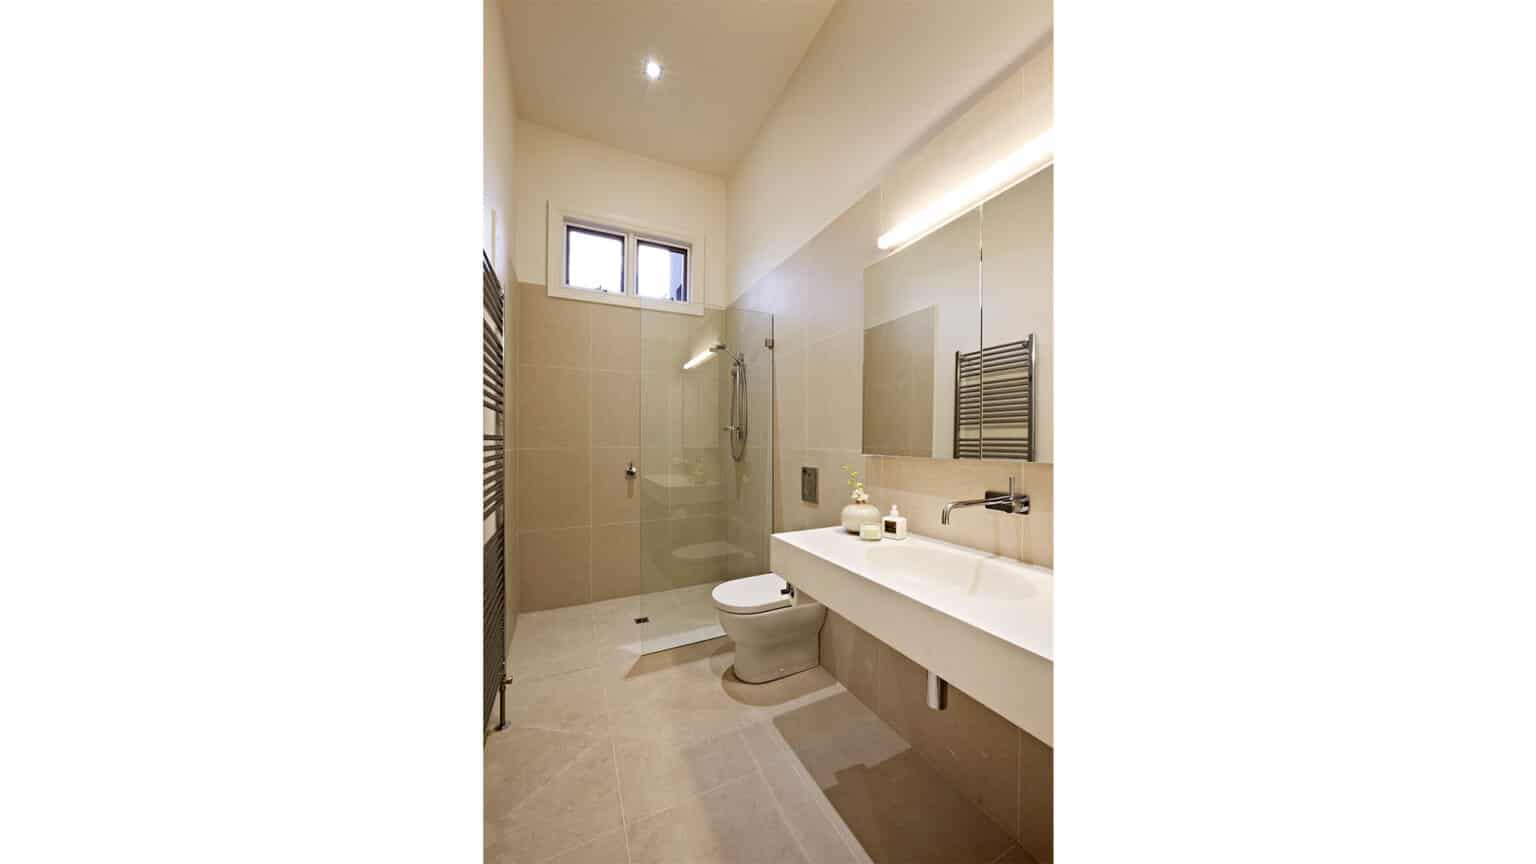 Hawthorn extension and renovations - bathroom